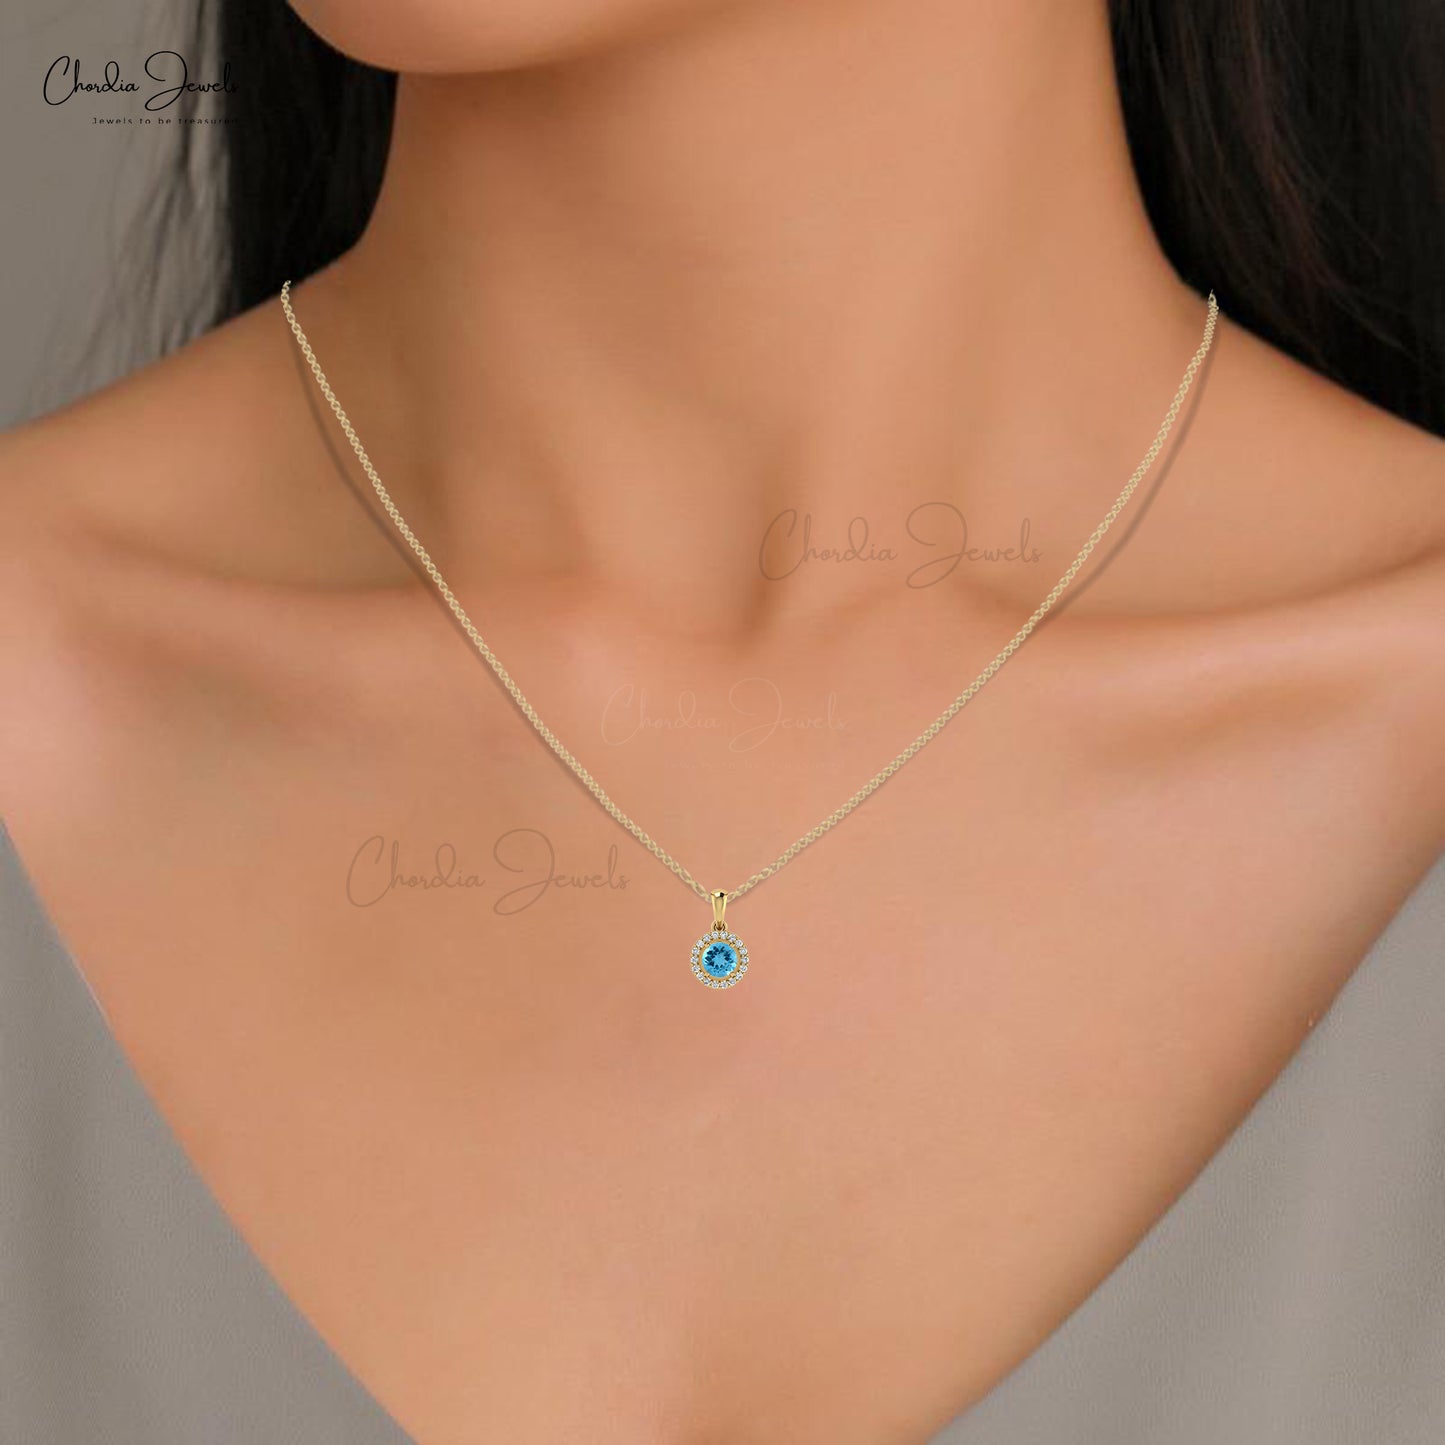 Unique Handmade Natural Diamond Halo Charms Pendant Necklace Round Shape Swiss Blue Topaz Gemstone Pendant in 14k Pure Gold Mother's Day Gift